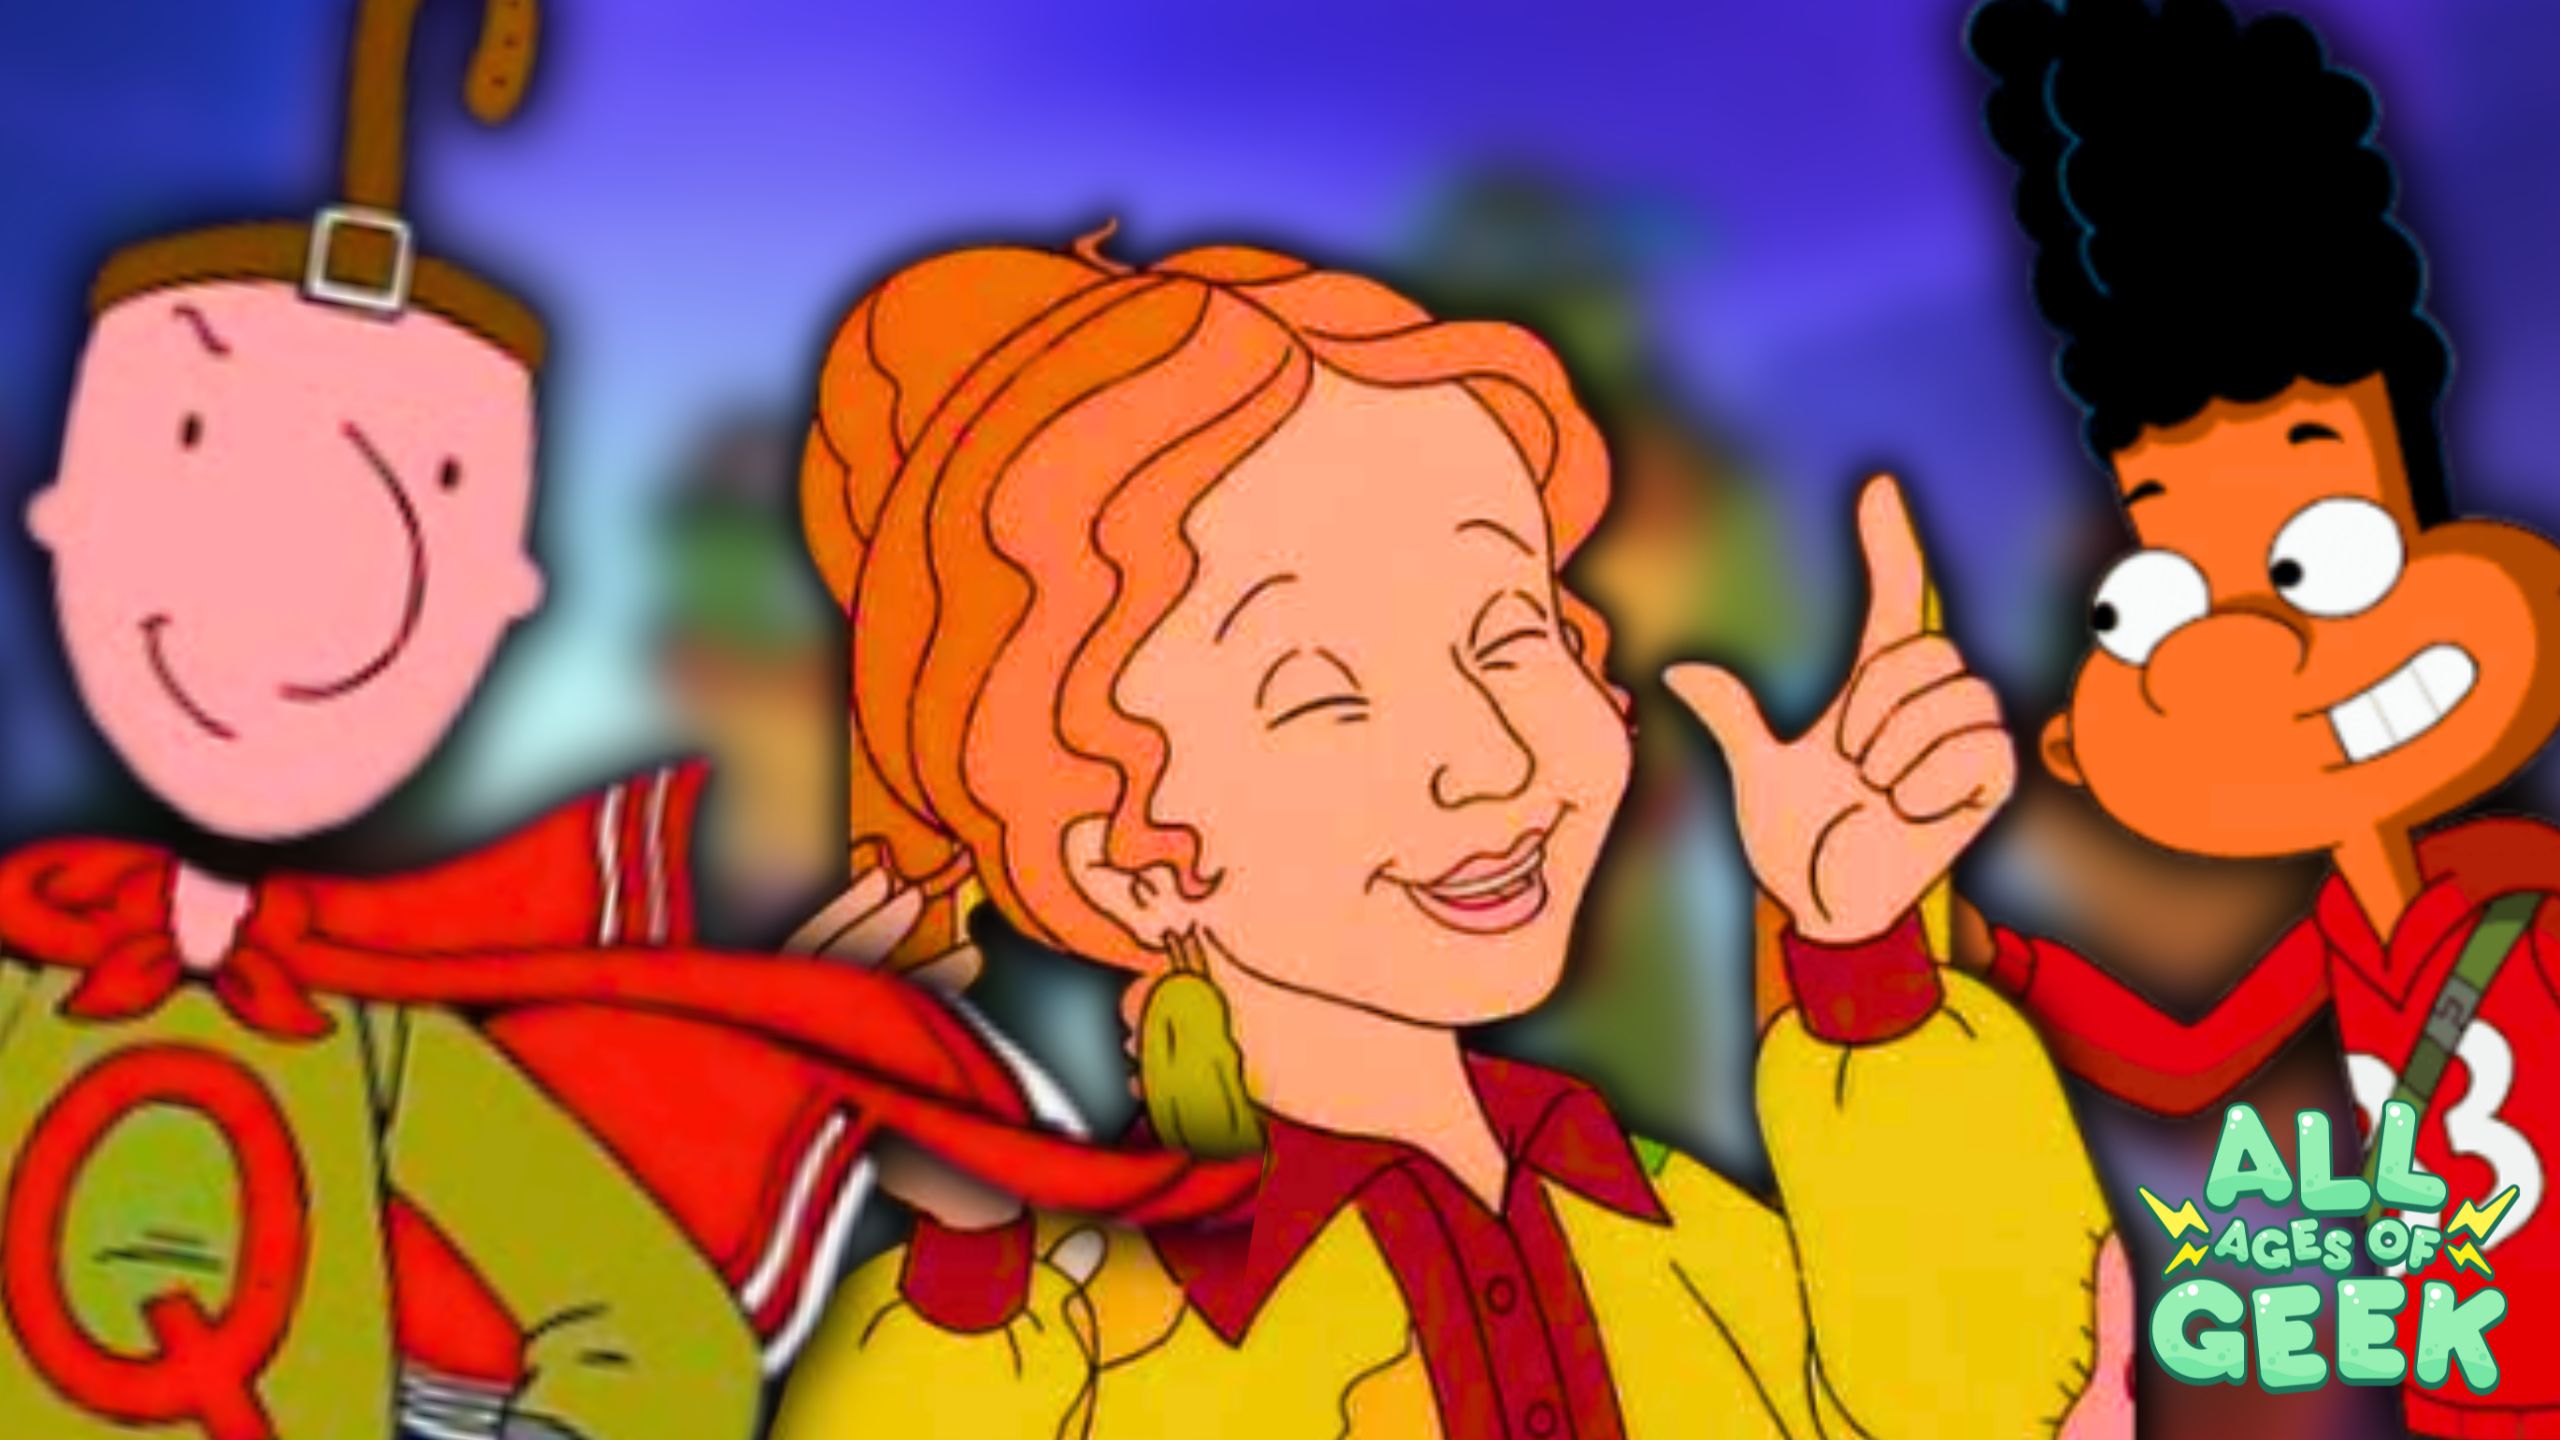 An animated scene featuring characters from different 90s cartoons. On the left, Quailman from 'Doug' stands with a smile, wearing his superhero costume with a green outfit and red cape. In the center is Ms. Frizzle from 'The Magic School Bus,' smiling with her eyes closed and gesturing with her hand. On the right is Gerald from 'Hey Arnold!' smiling and looking towards Ms. Frizzle. The background is a blurred colorful setting, and the 'All Ages of Geek' logo is in the bottom right corner.